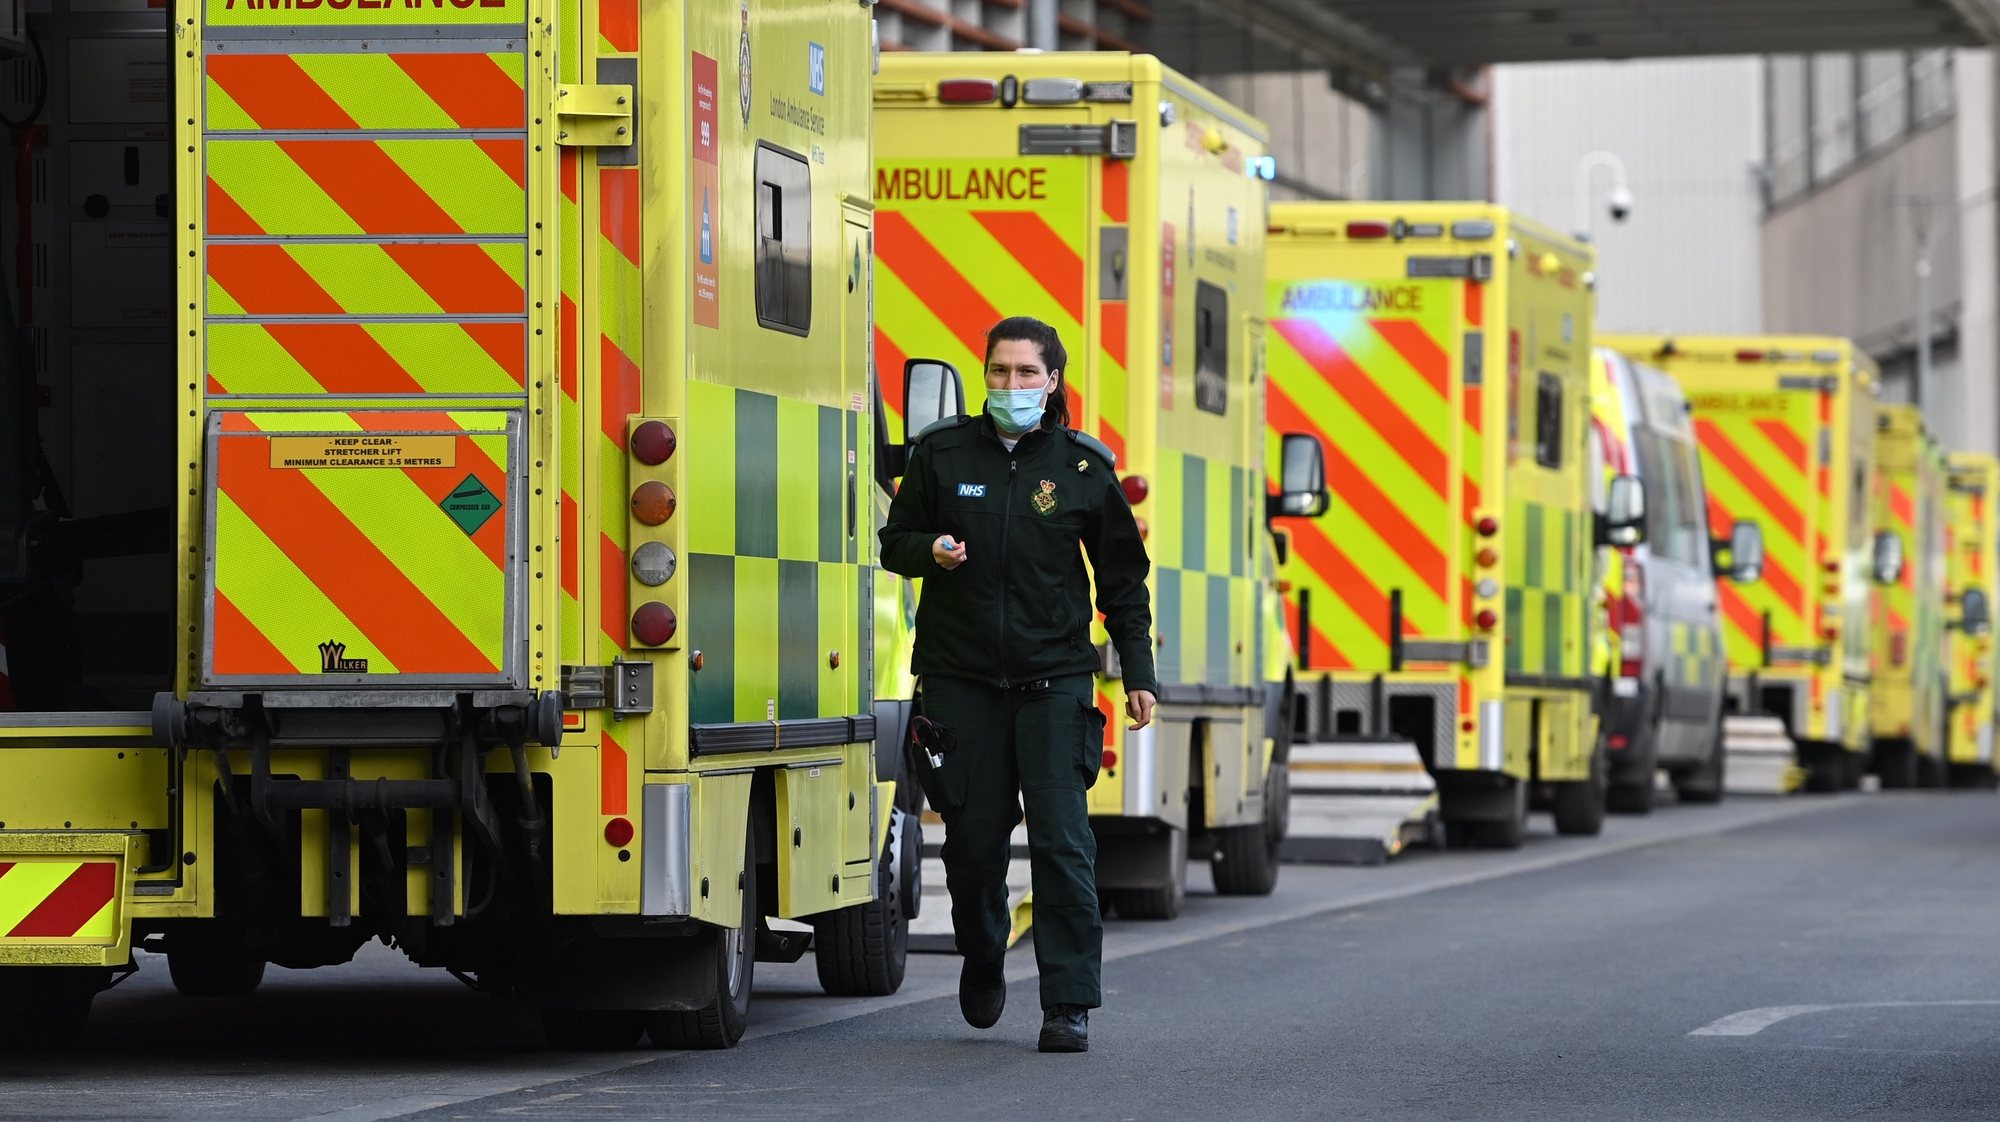 epa09009142 Ambulance staff outside the Royal London hospital in London, Britain, 13 February 2021. Britain&#039;s National health service (NHS) has been under sever pressure even as Covid-19 hospital admissions continue to fall across the UK.  EPA/ANDY RAIN